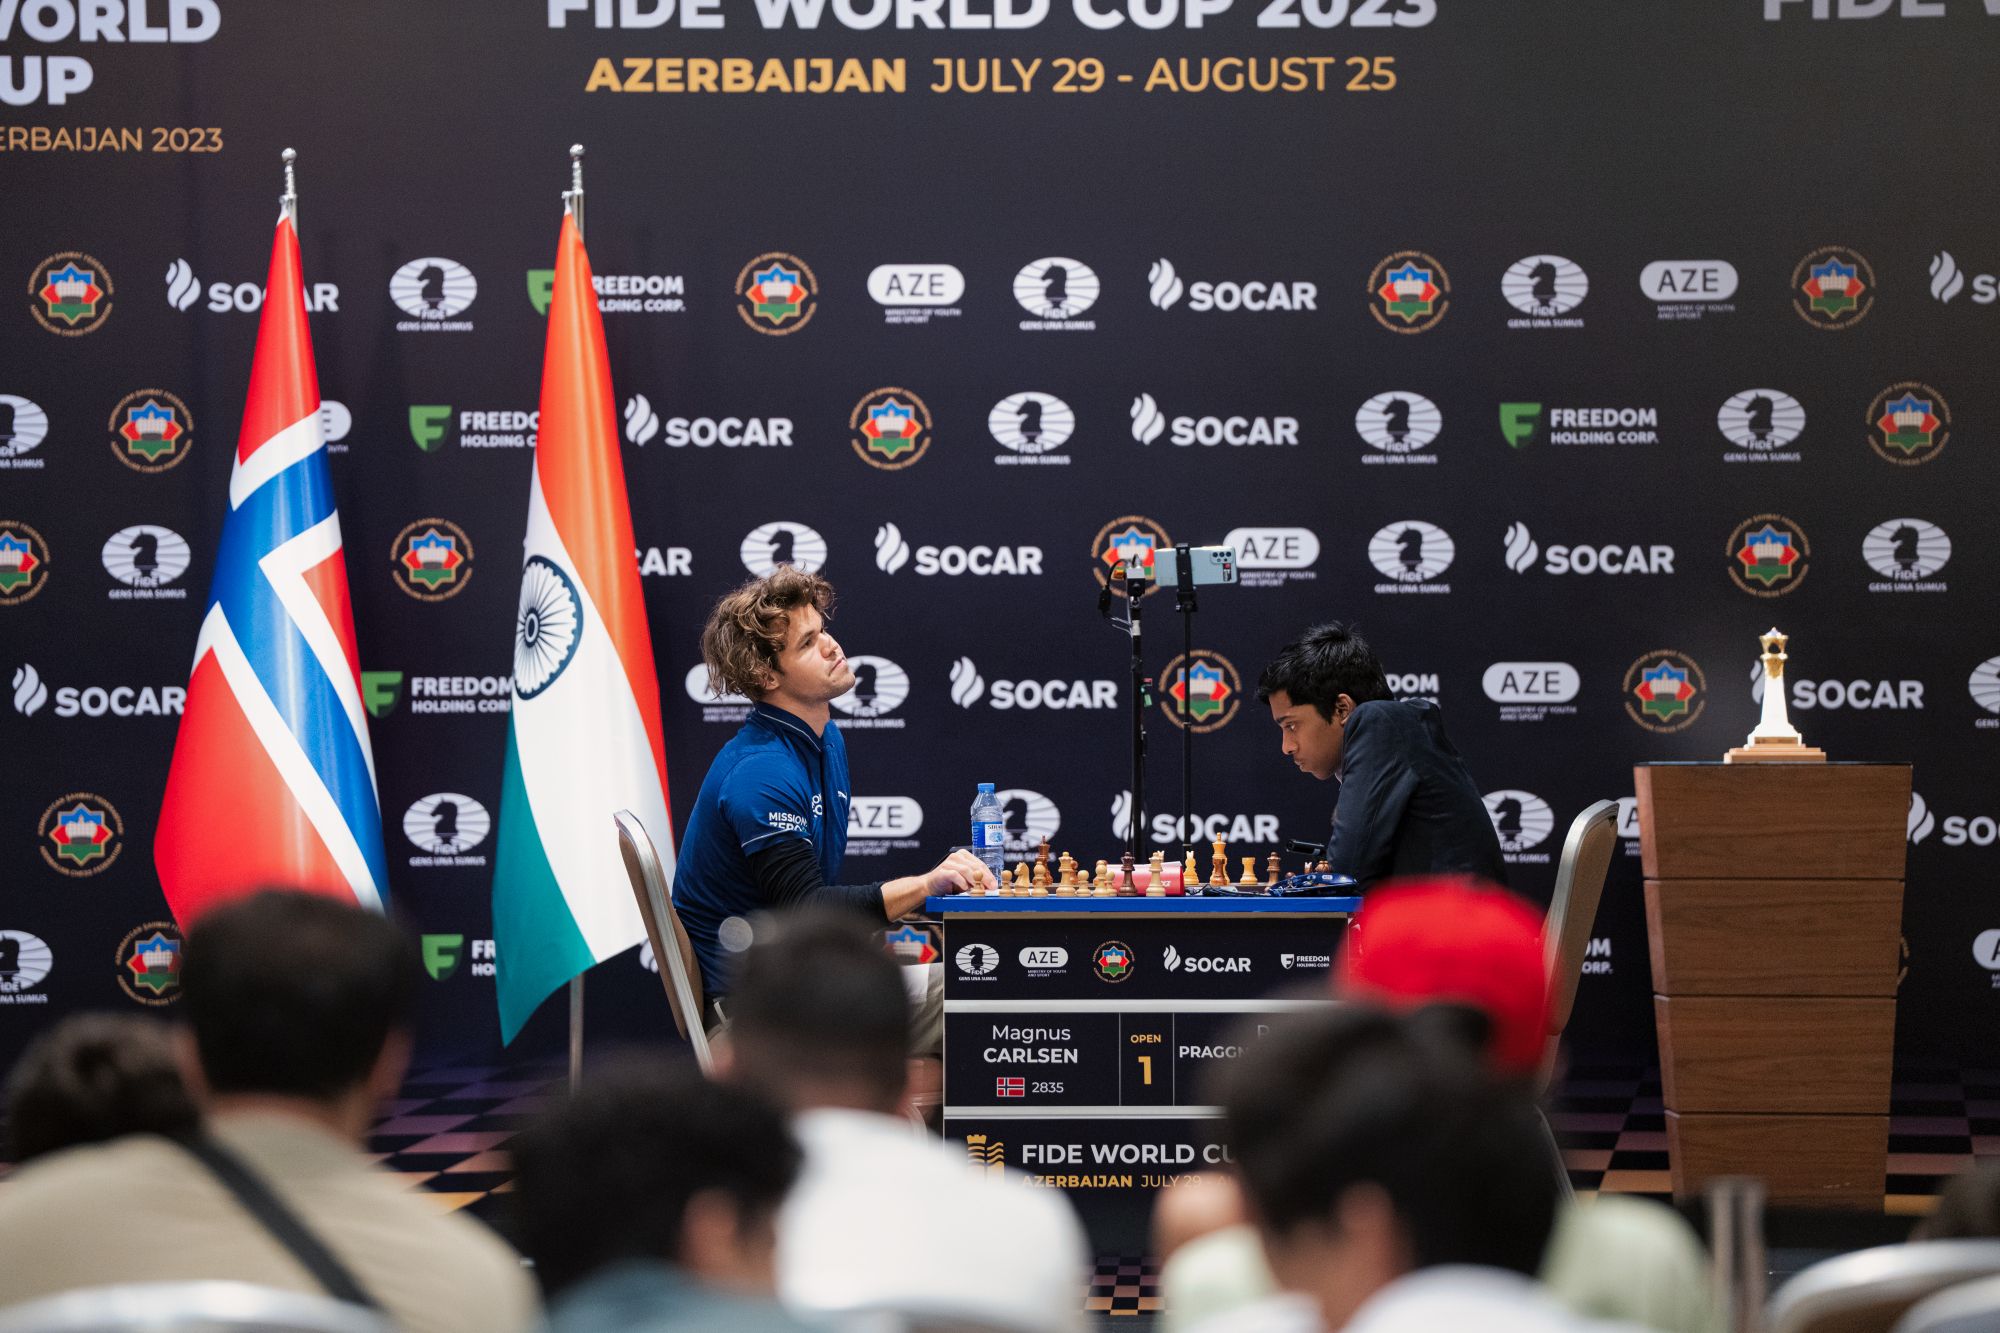 chess24.com on X: And it's over! The first game of the FIDE World #Chess  Championship ends in a DRAW after an intense battle where reigning champ  Magnus Carlsen looked to be taking